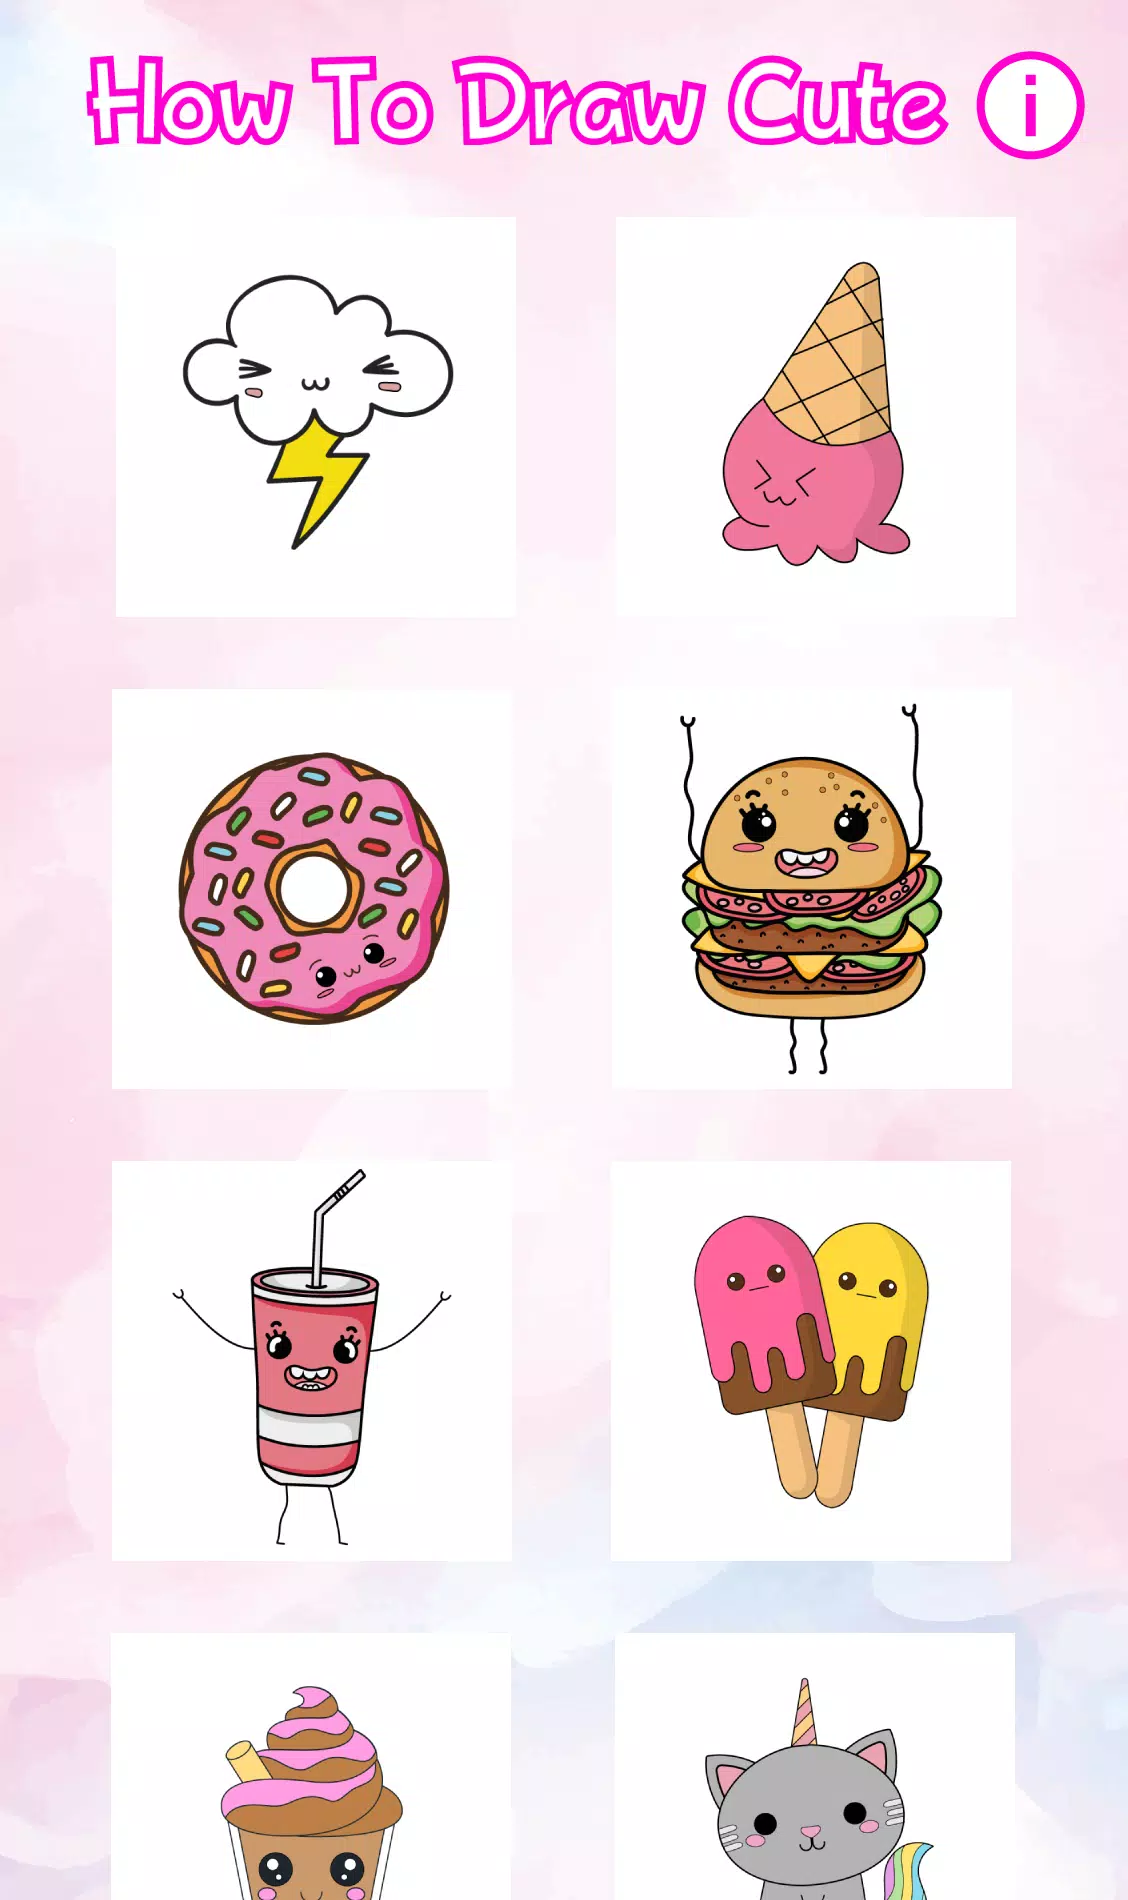 Tải xuống APK How To Draw Cute cho Android